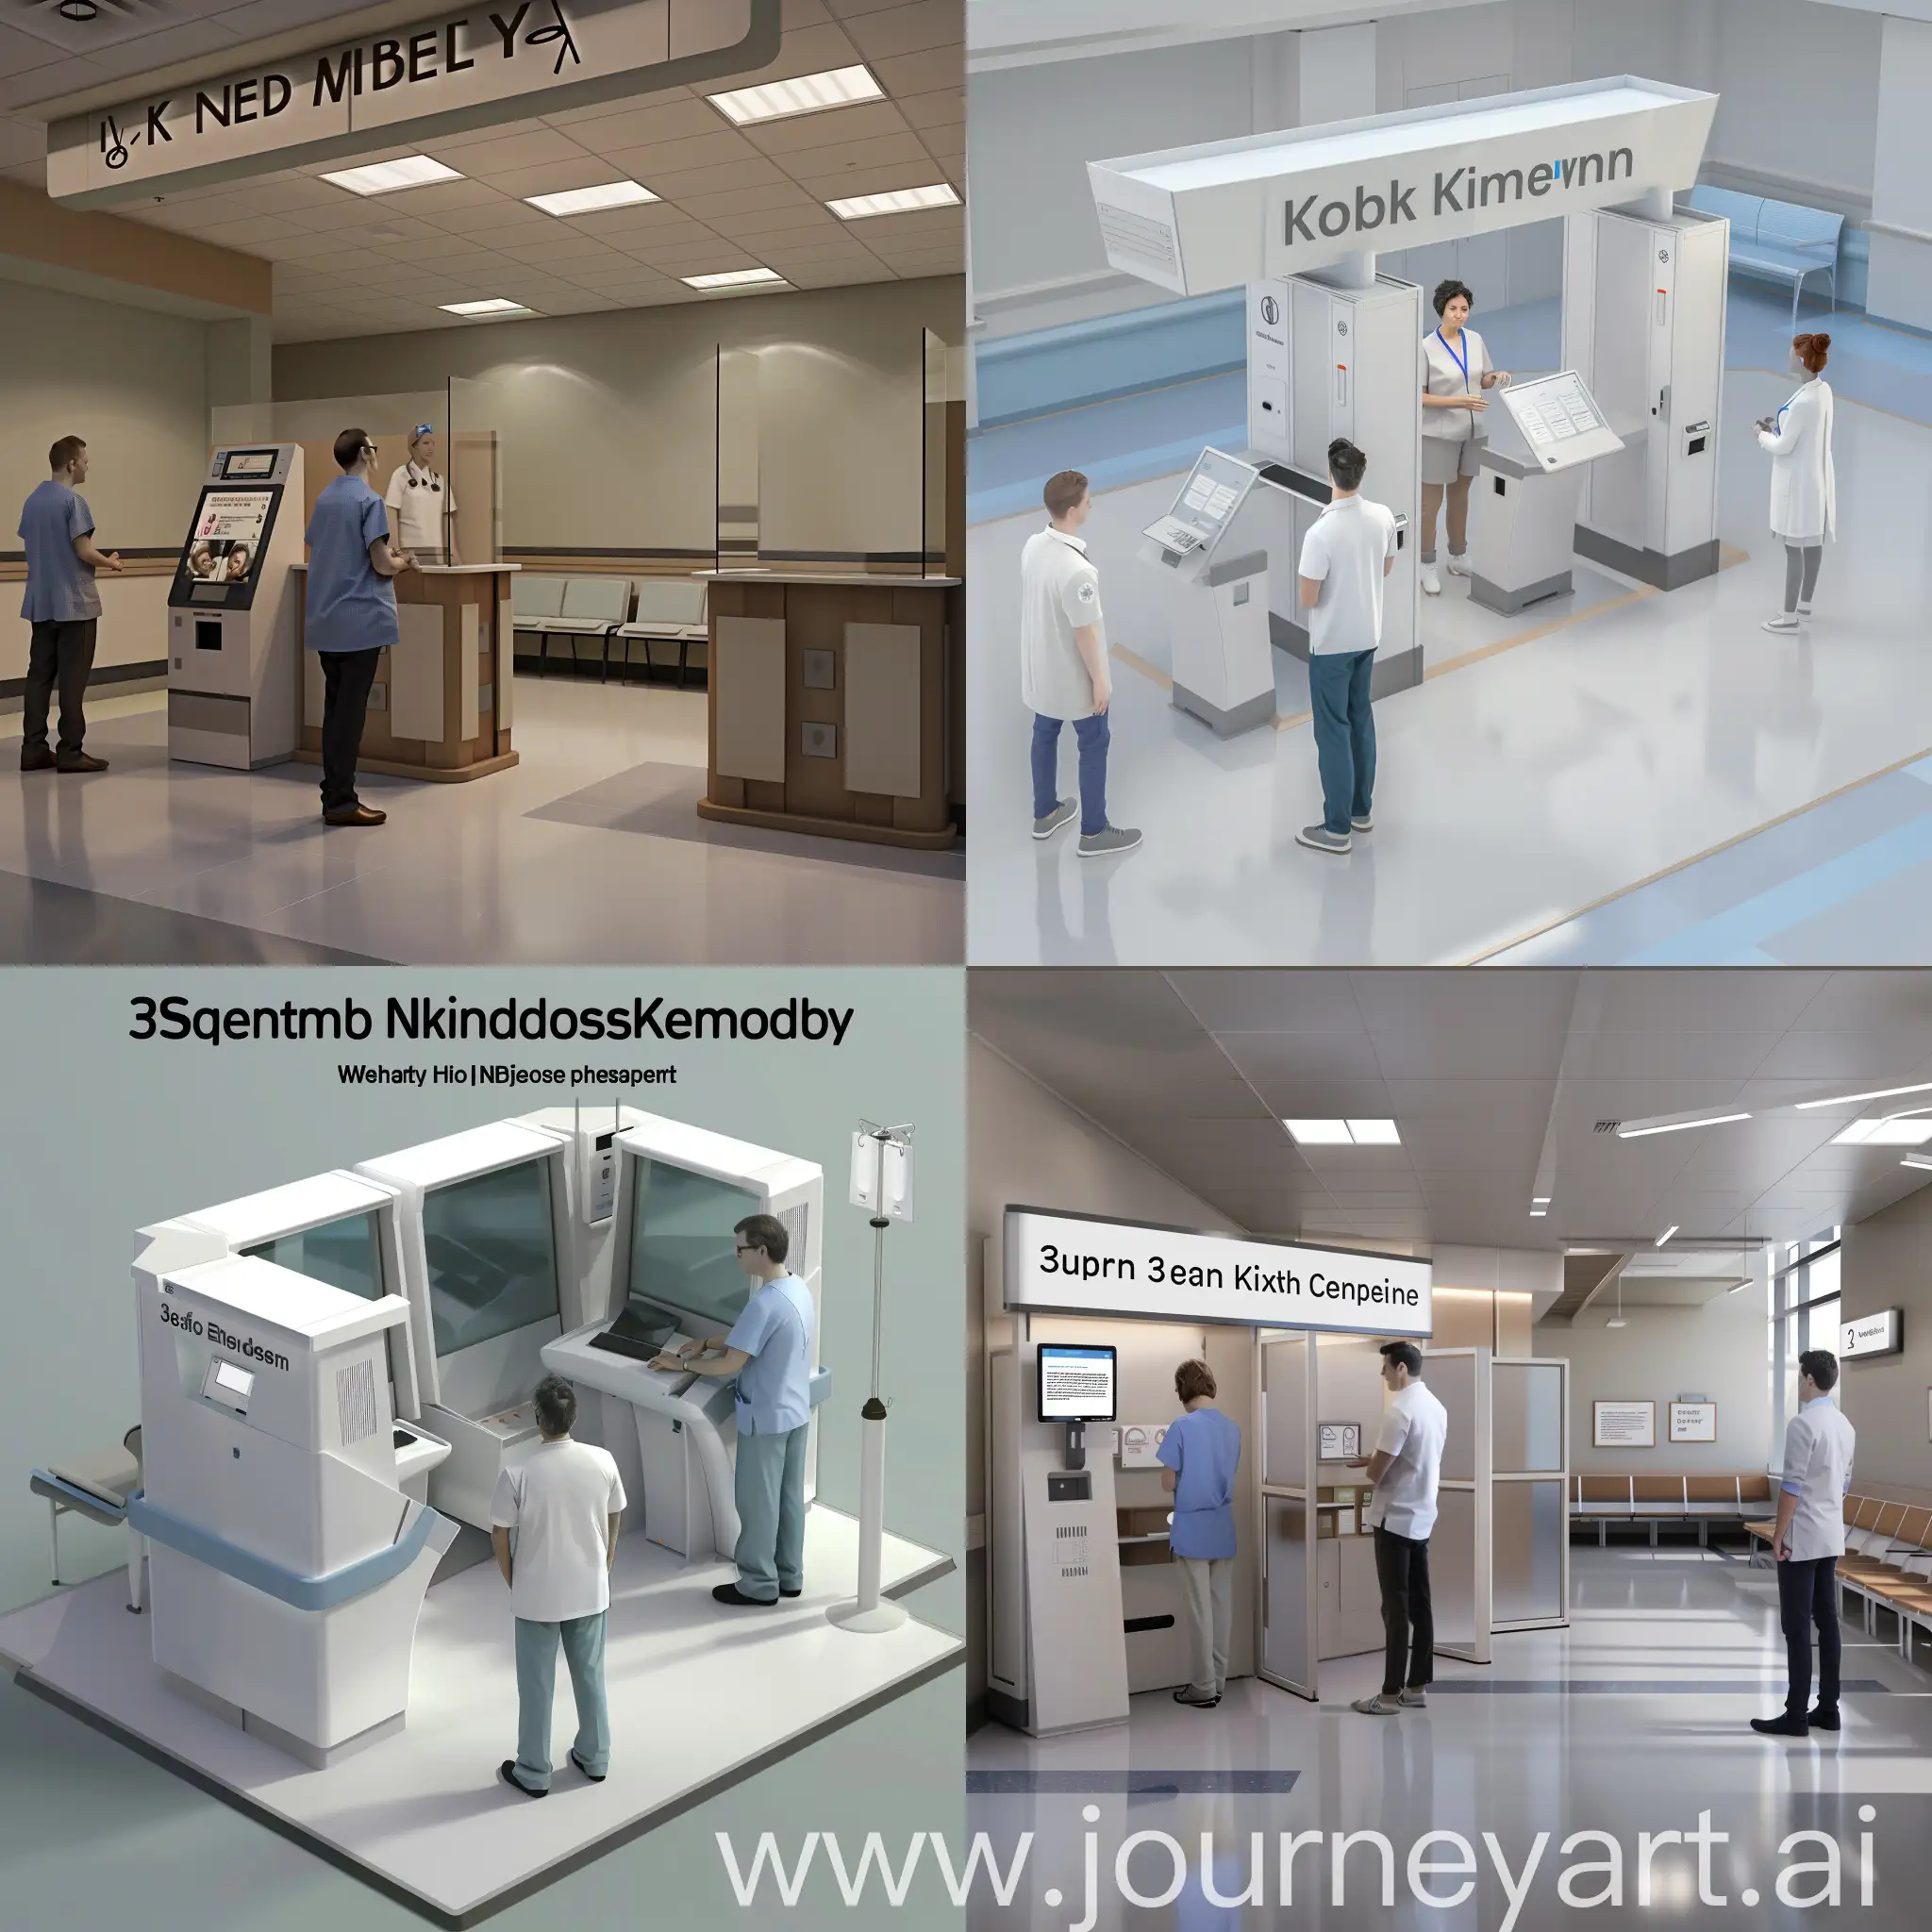 Hospital-Kiosk-Area-with-Patient-and-Staff